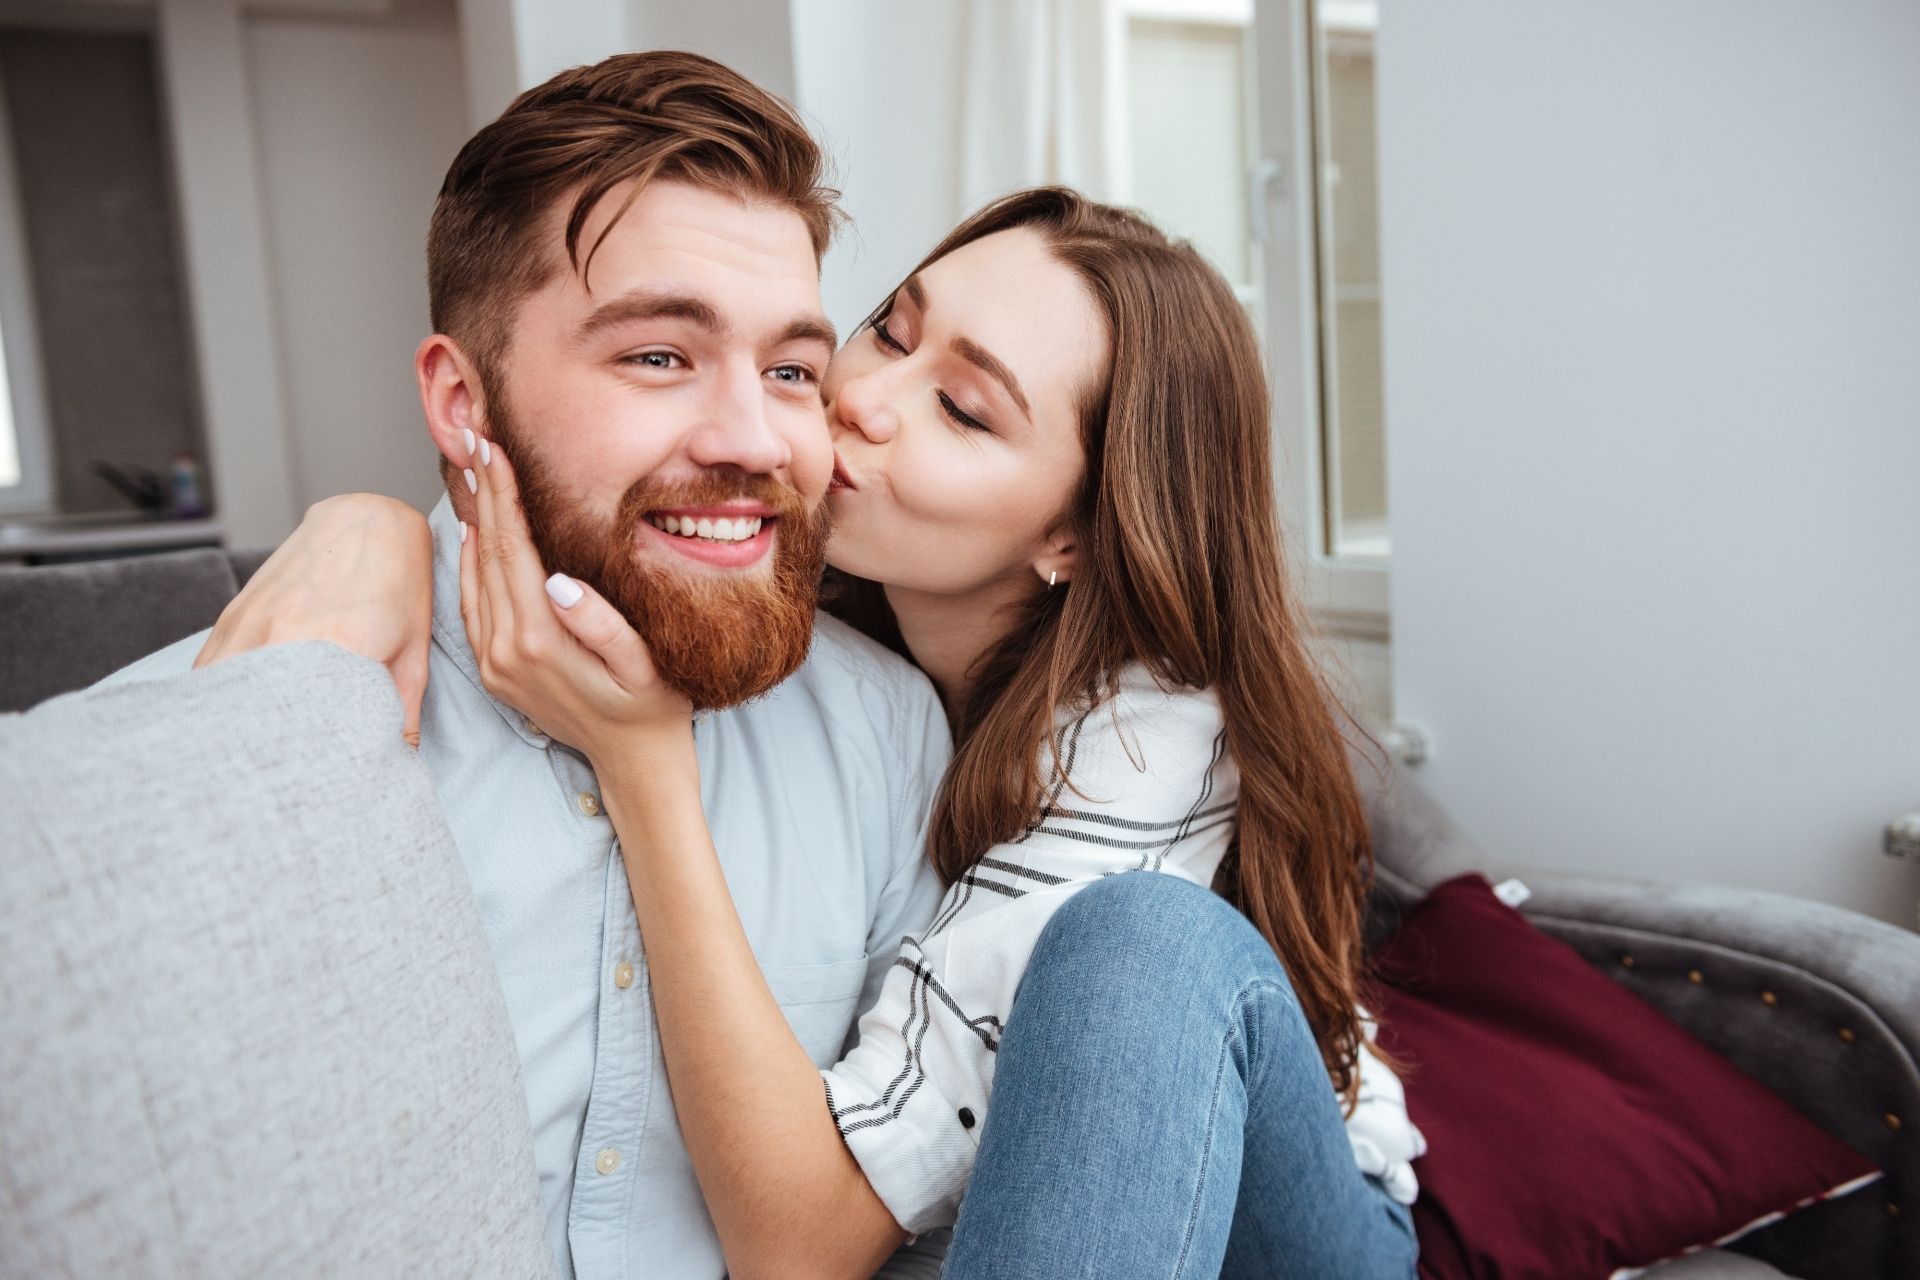 Ways To Become Irresistible To Your Spouse